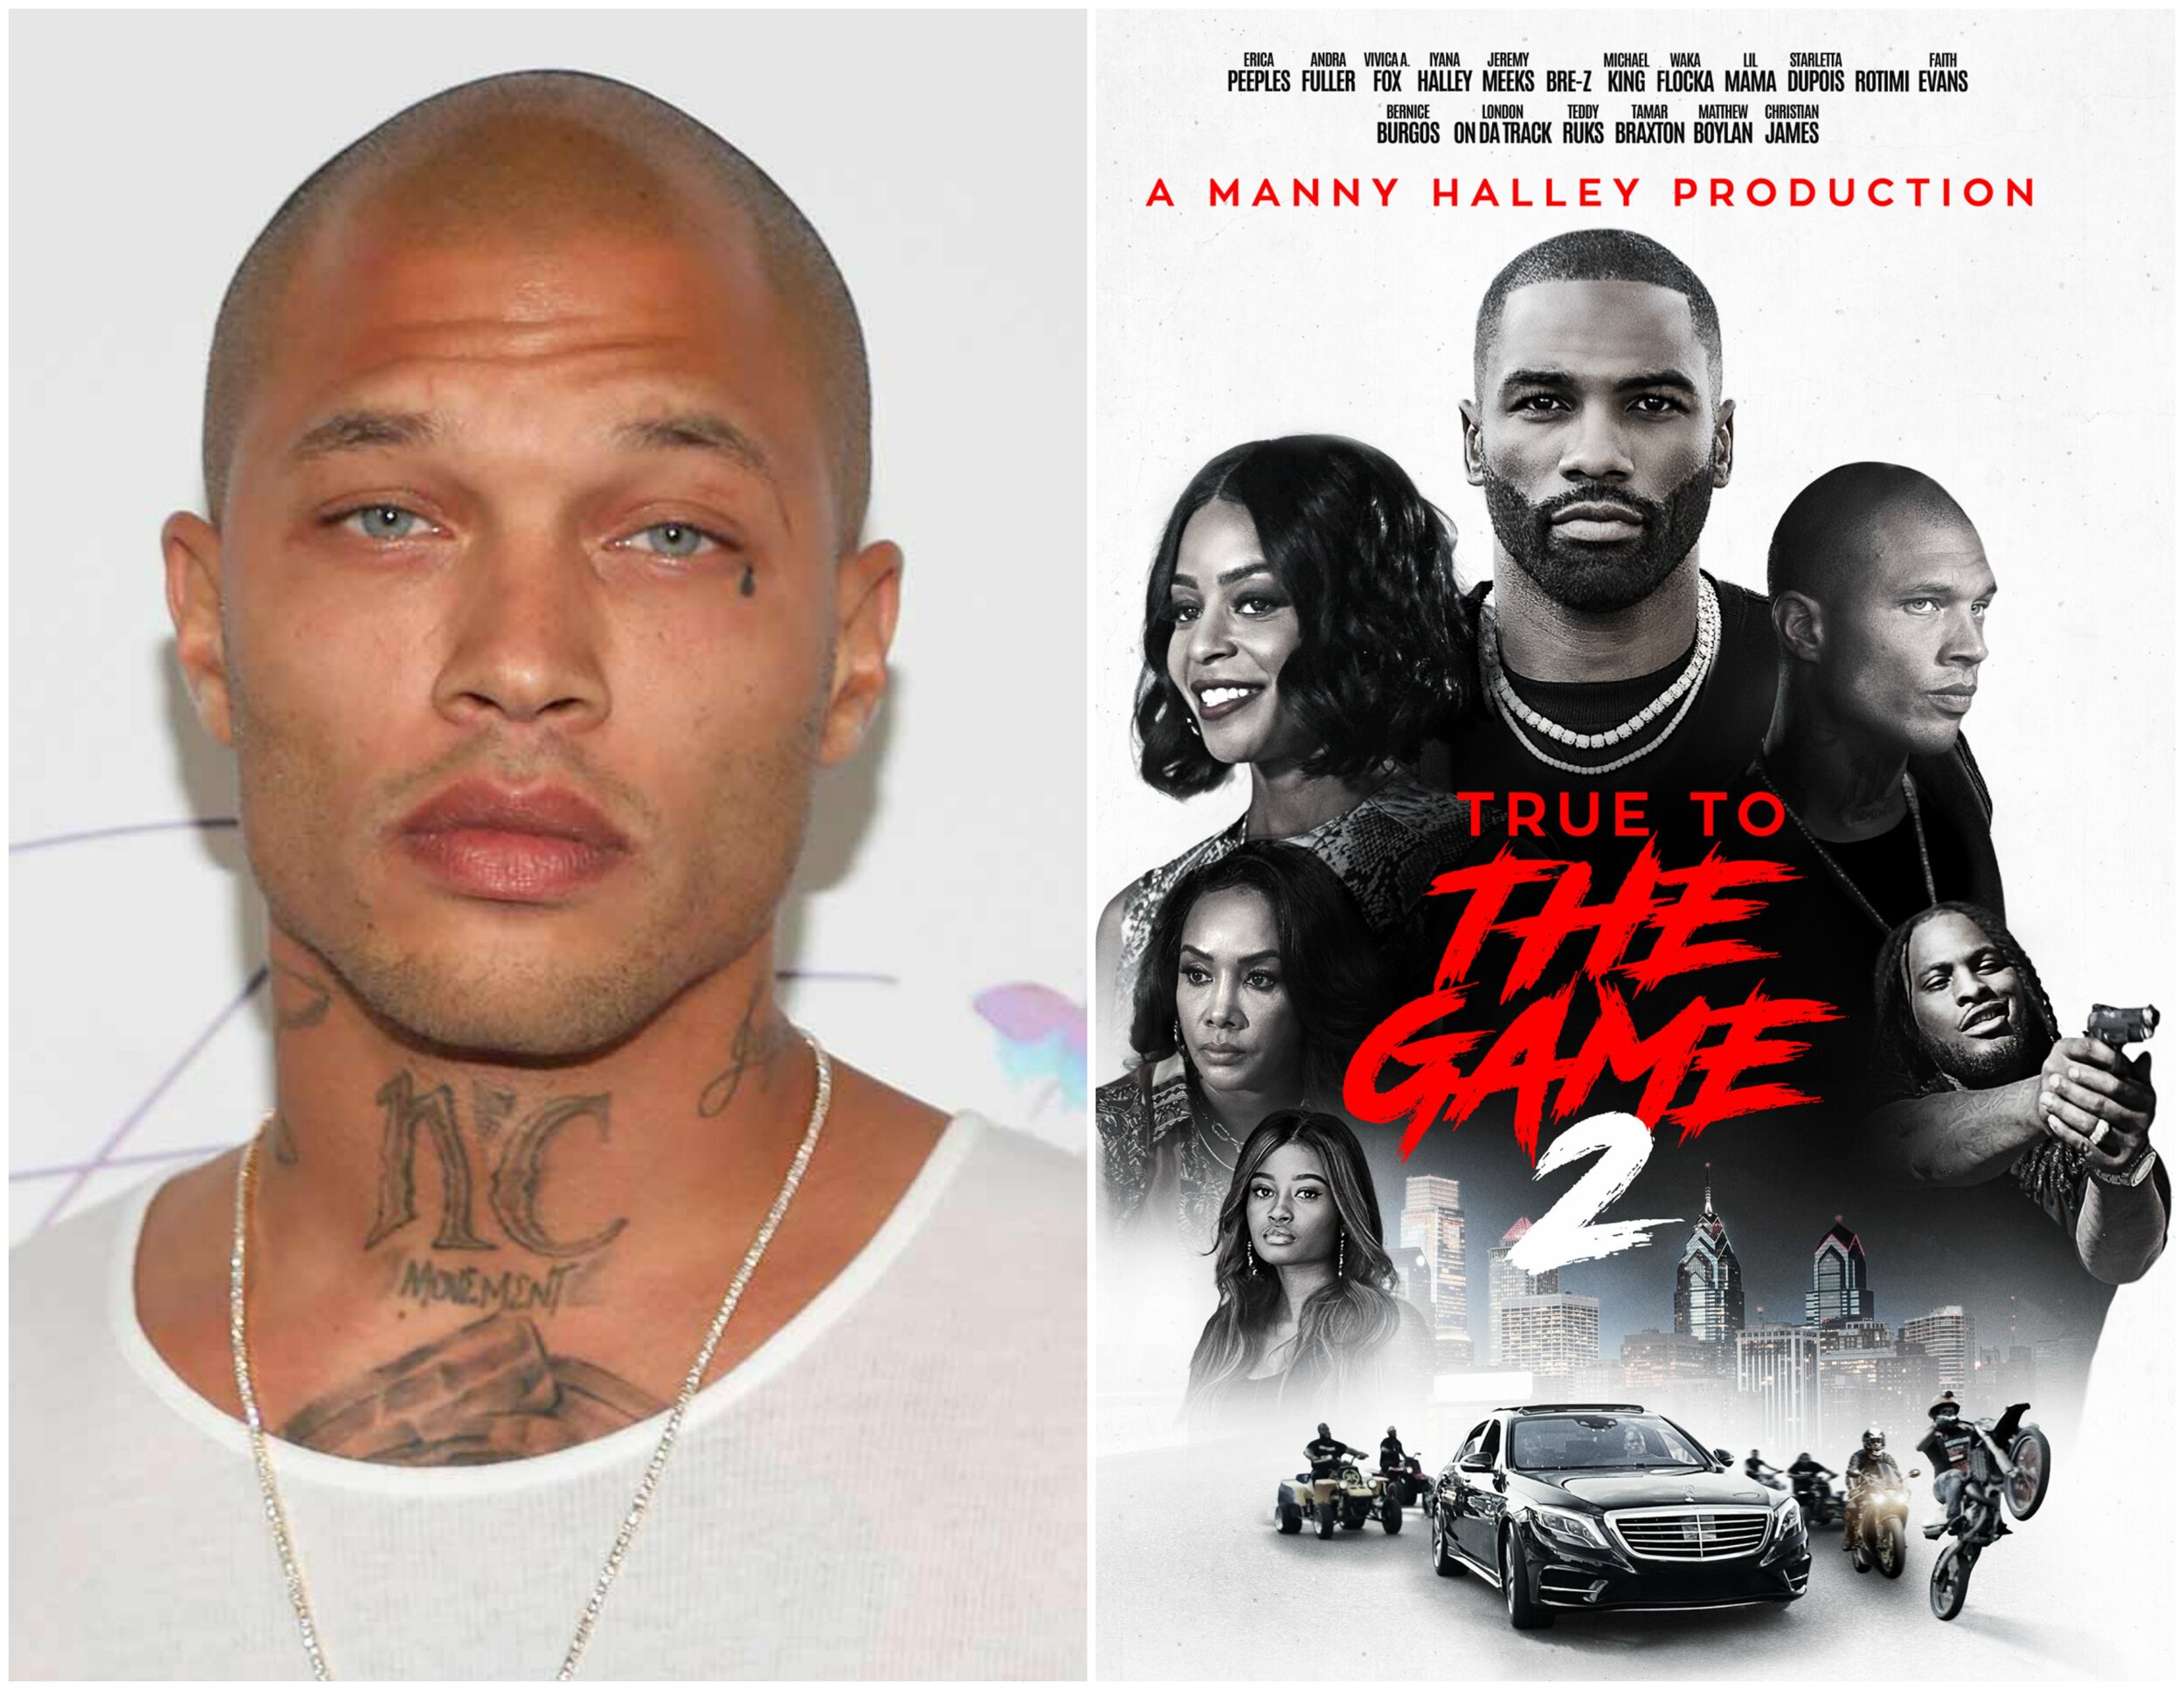 Jeremy+Meeks+True+To+The+Game+2